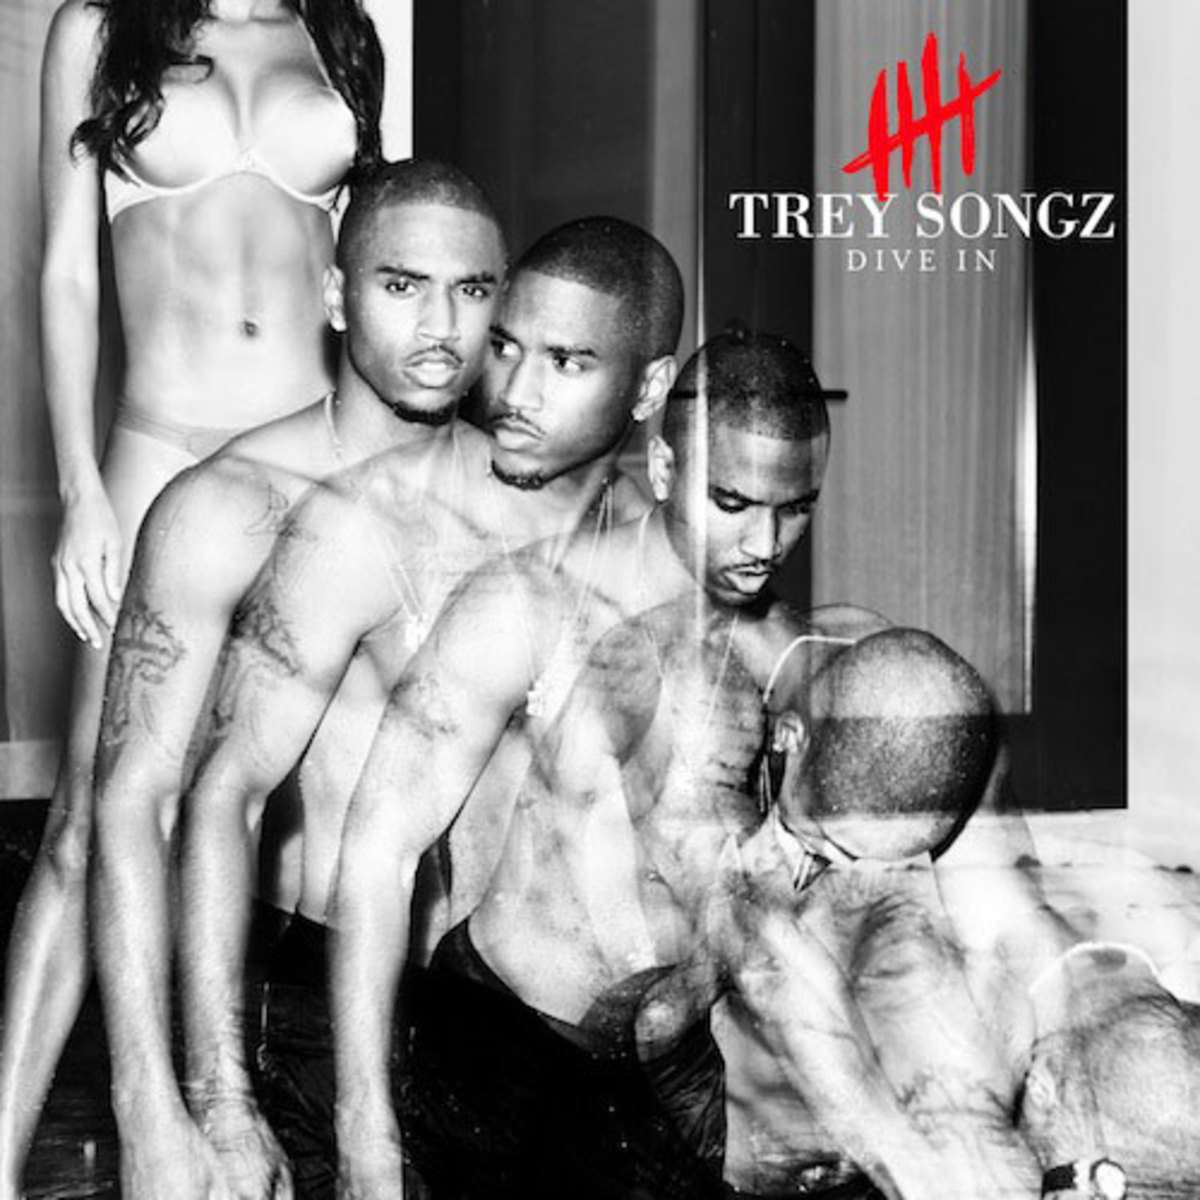 Trey songz dive in mp3 download